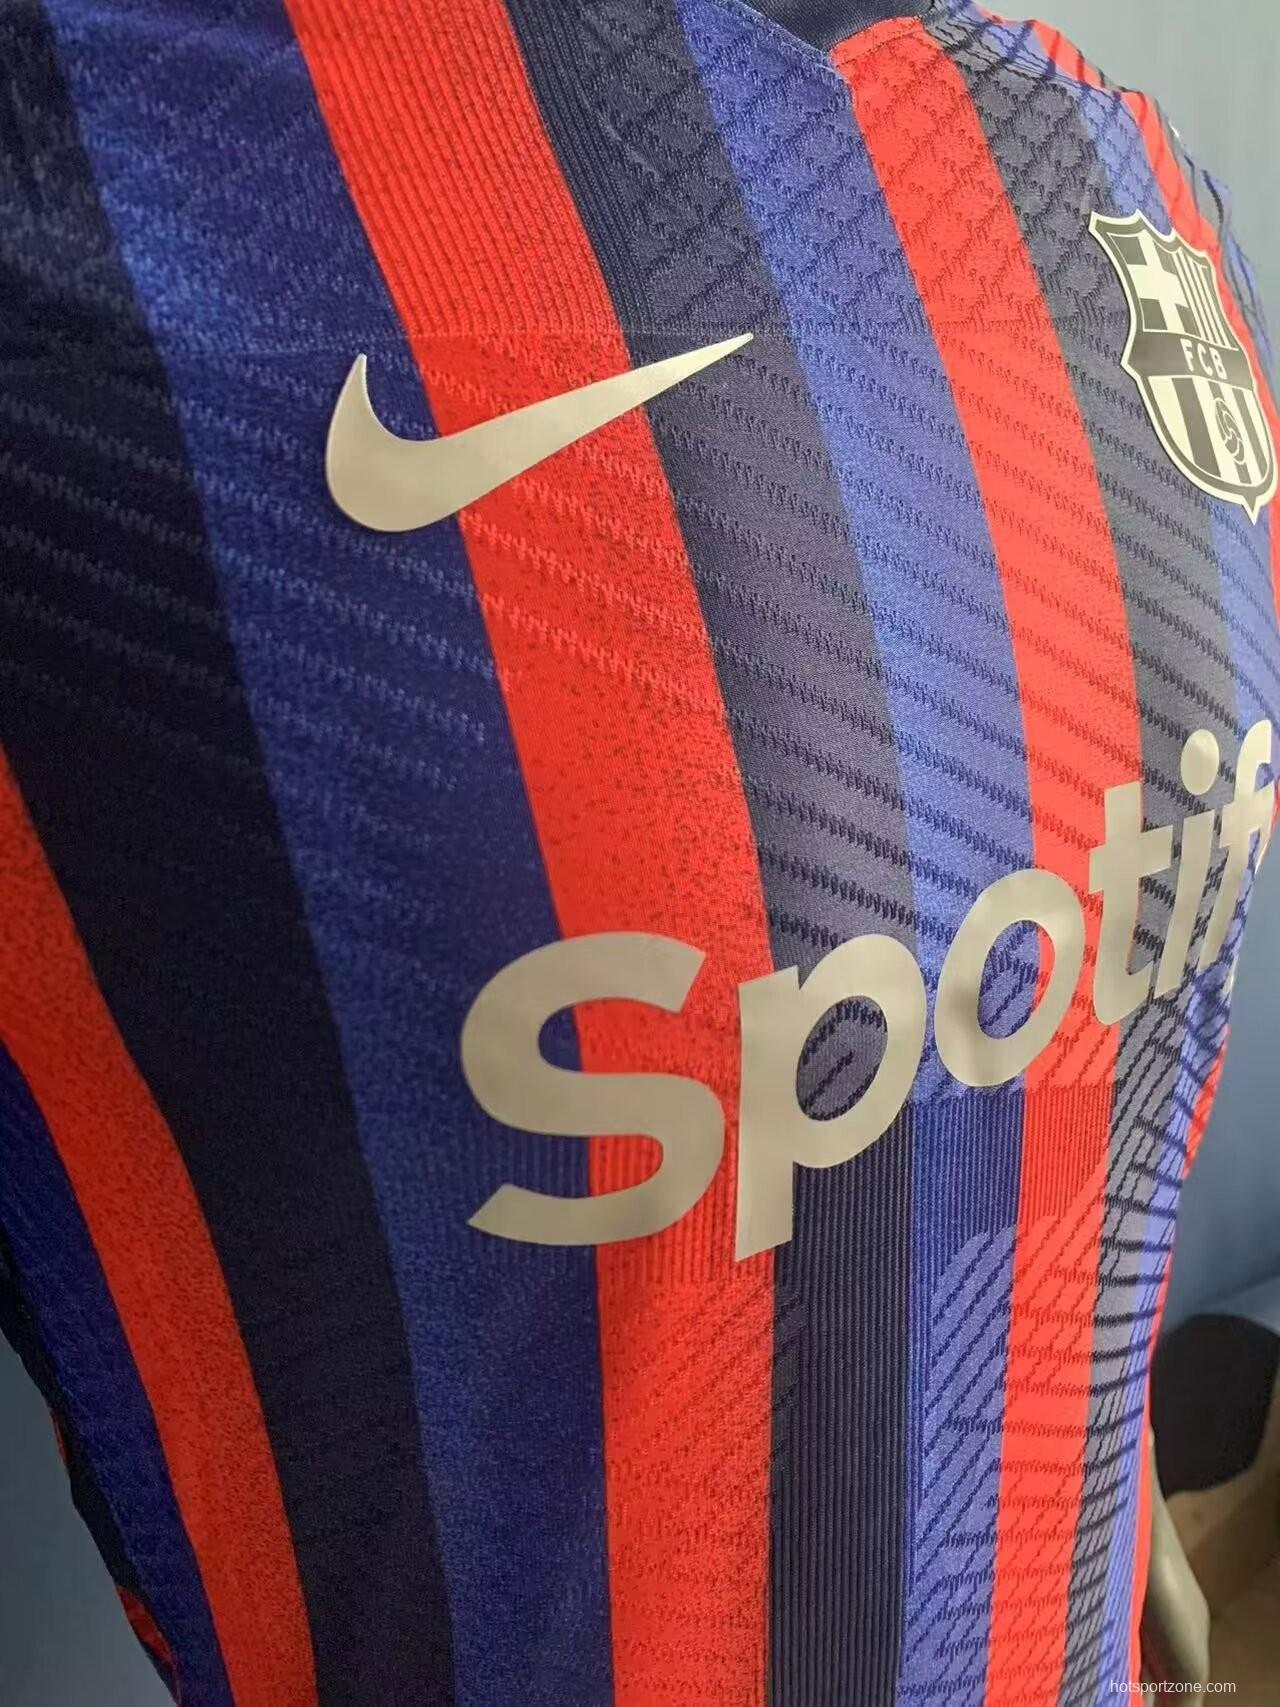 Player Version 23/24 Barcelona Special Jersey